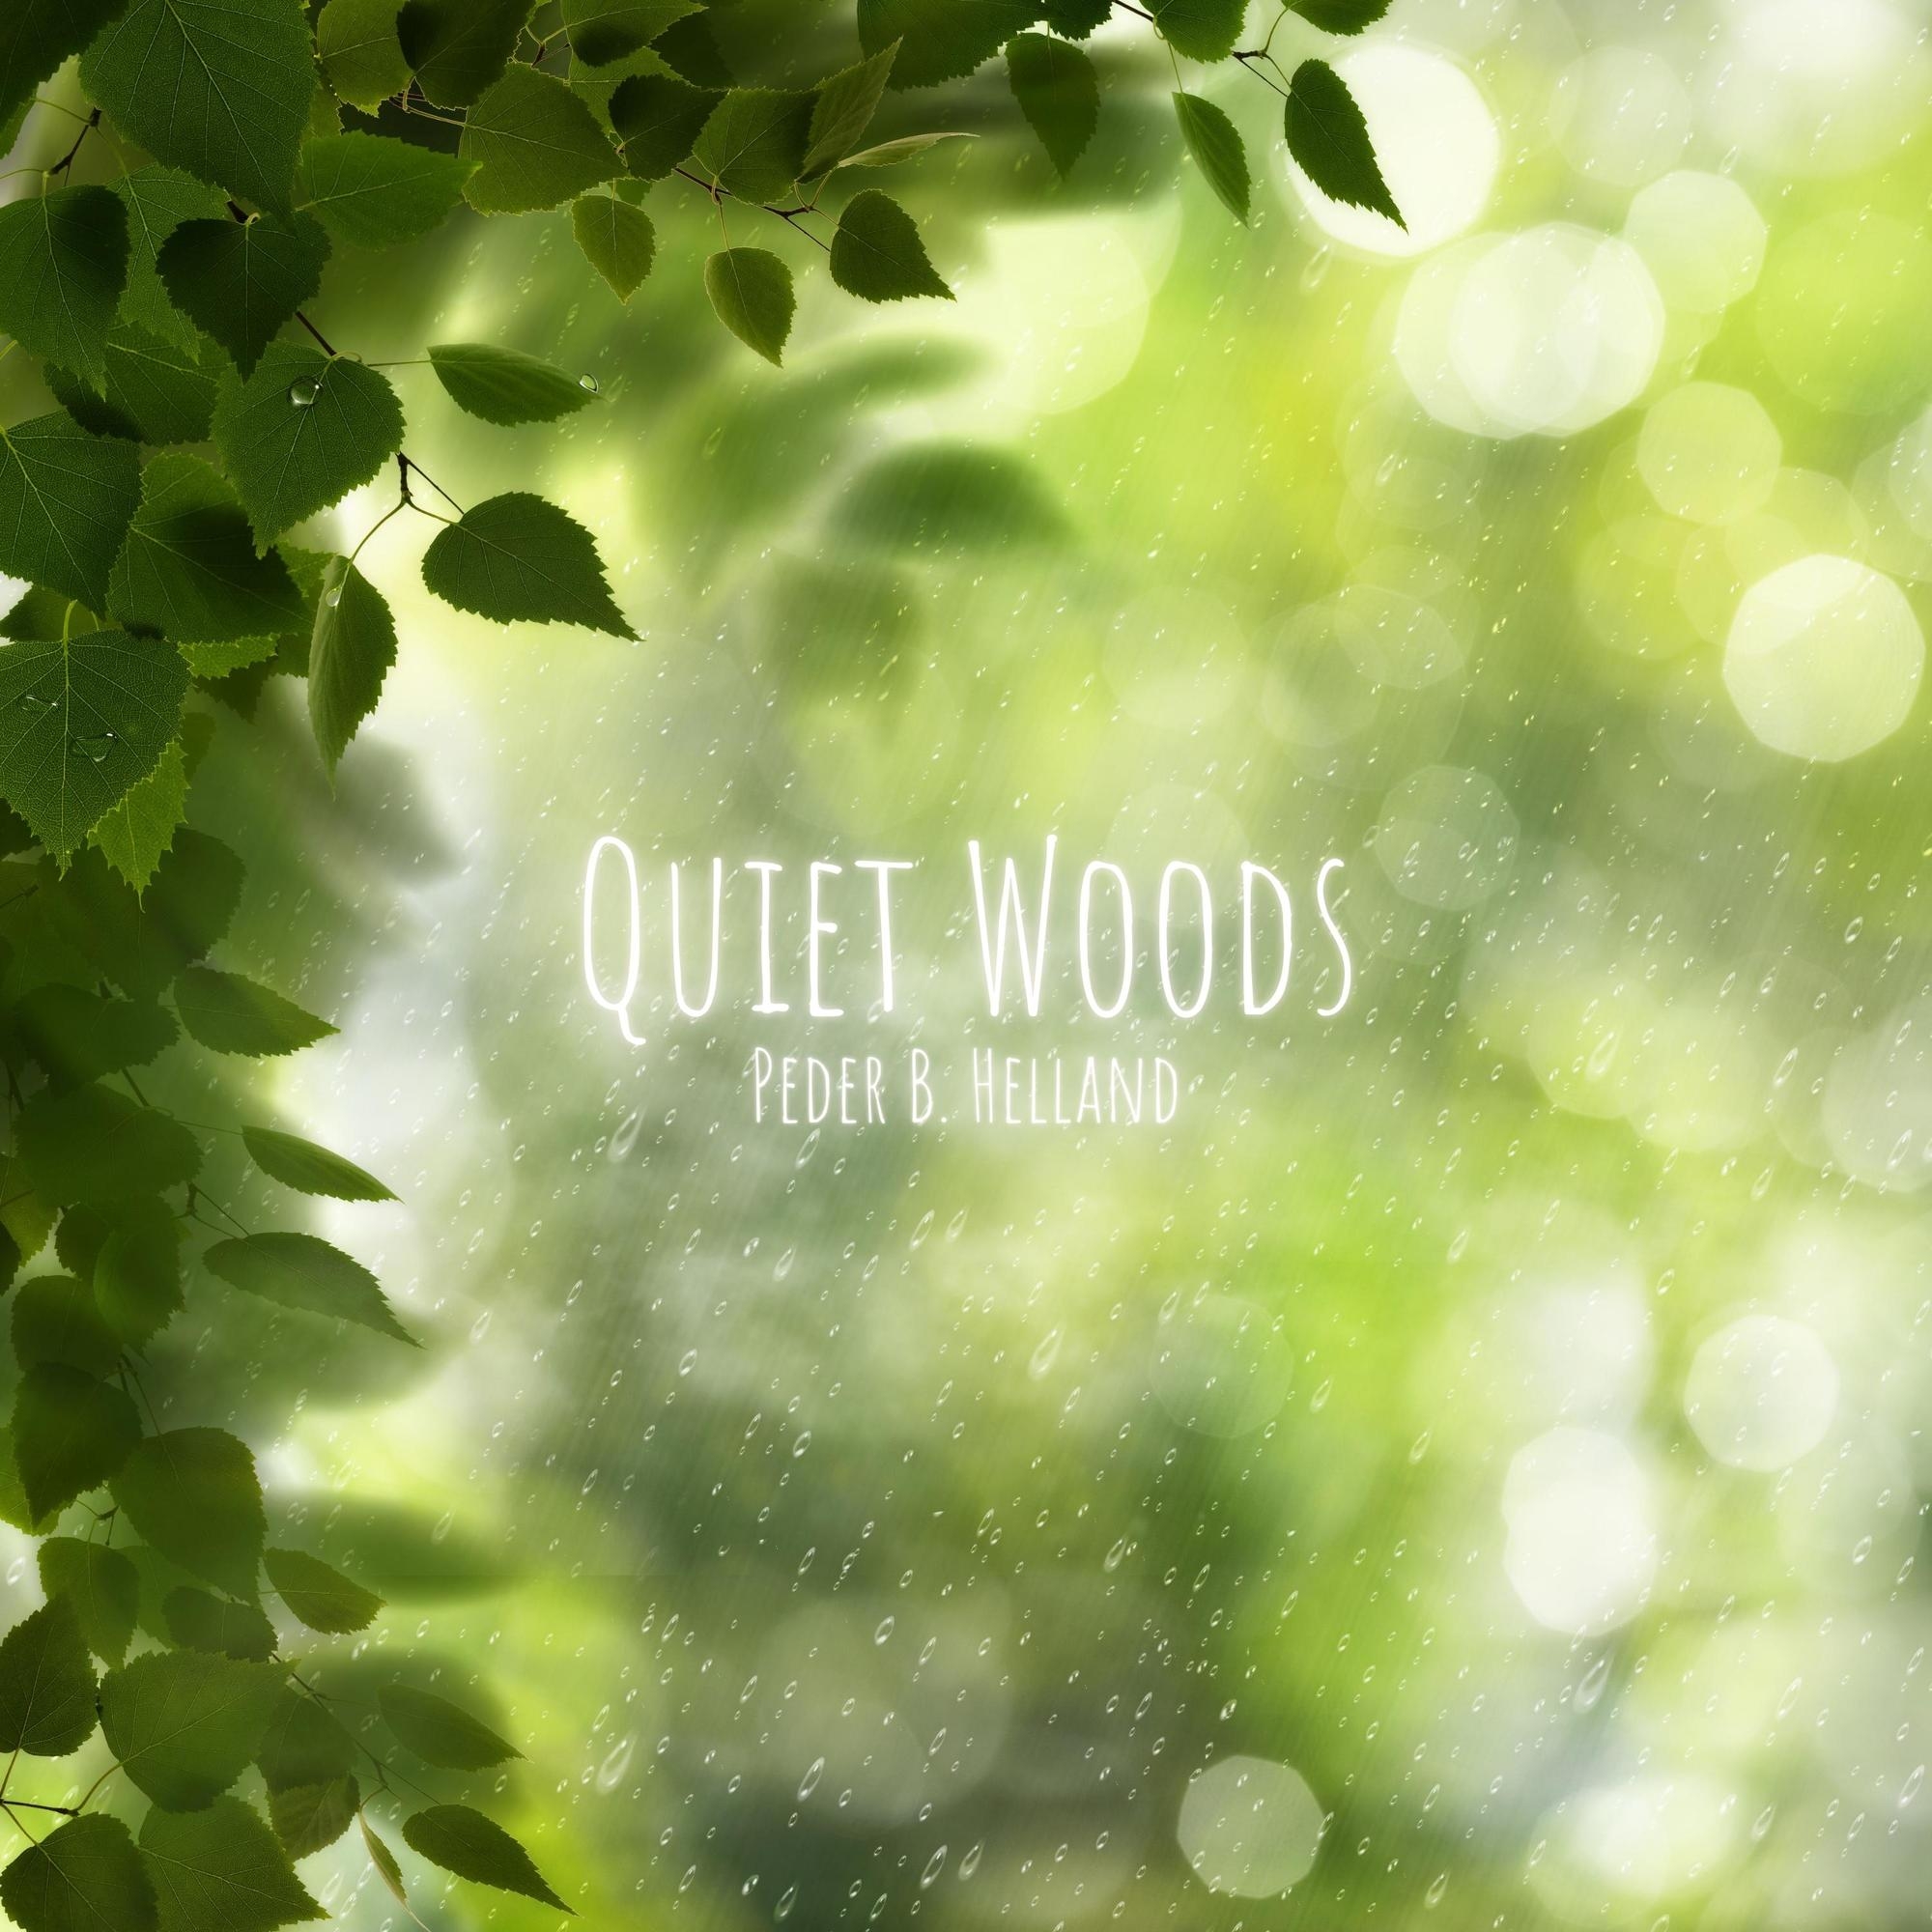 Cover art for the single Quiet Woods by Peder B. Helland